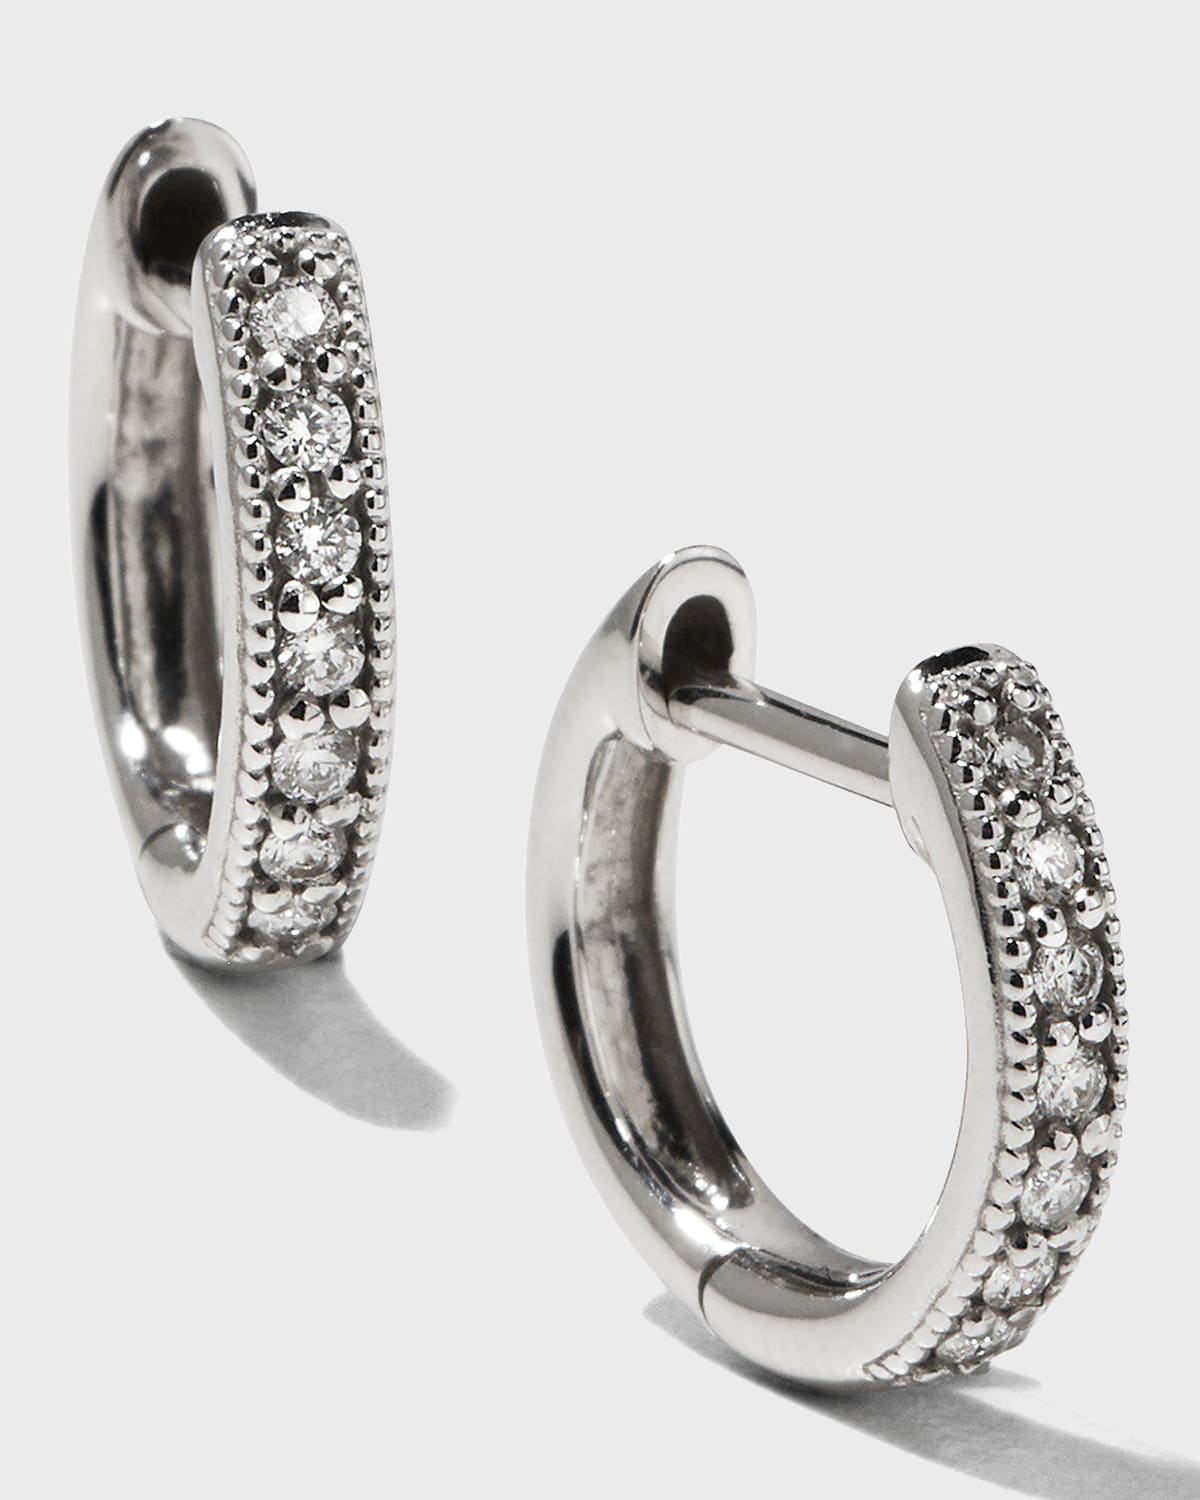 Jude Frances Small 18K White Gold Huggie Hoop Earrings with Diamonds, 11mm